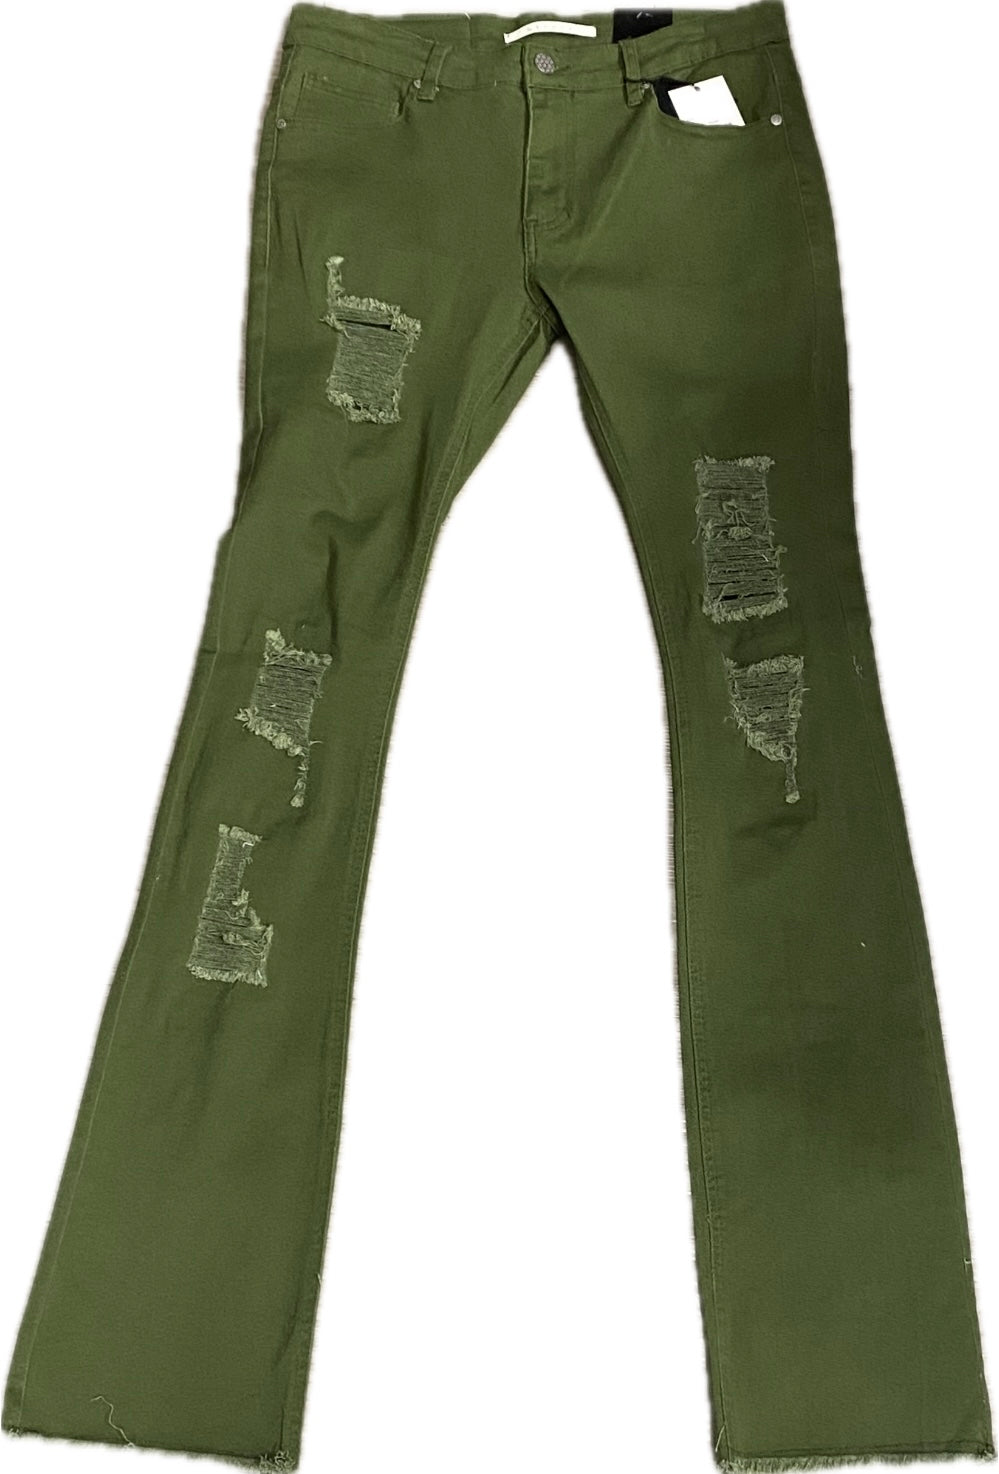 MEN’S CLOUD 9 STACKED FIT OLIVE JEANS